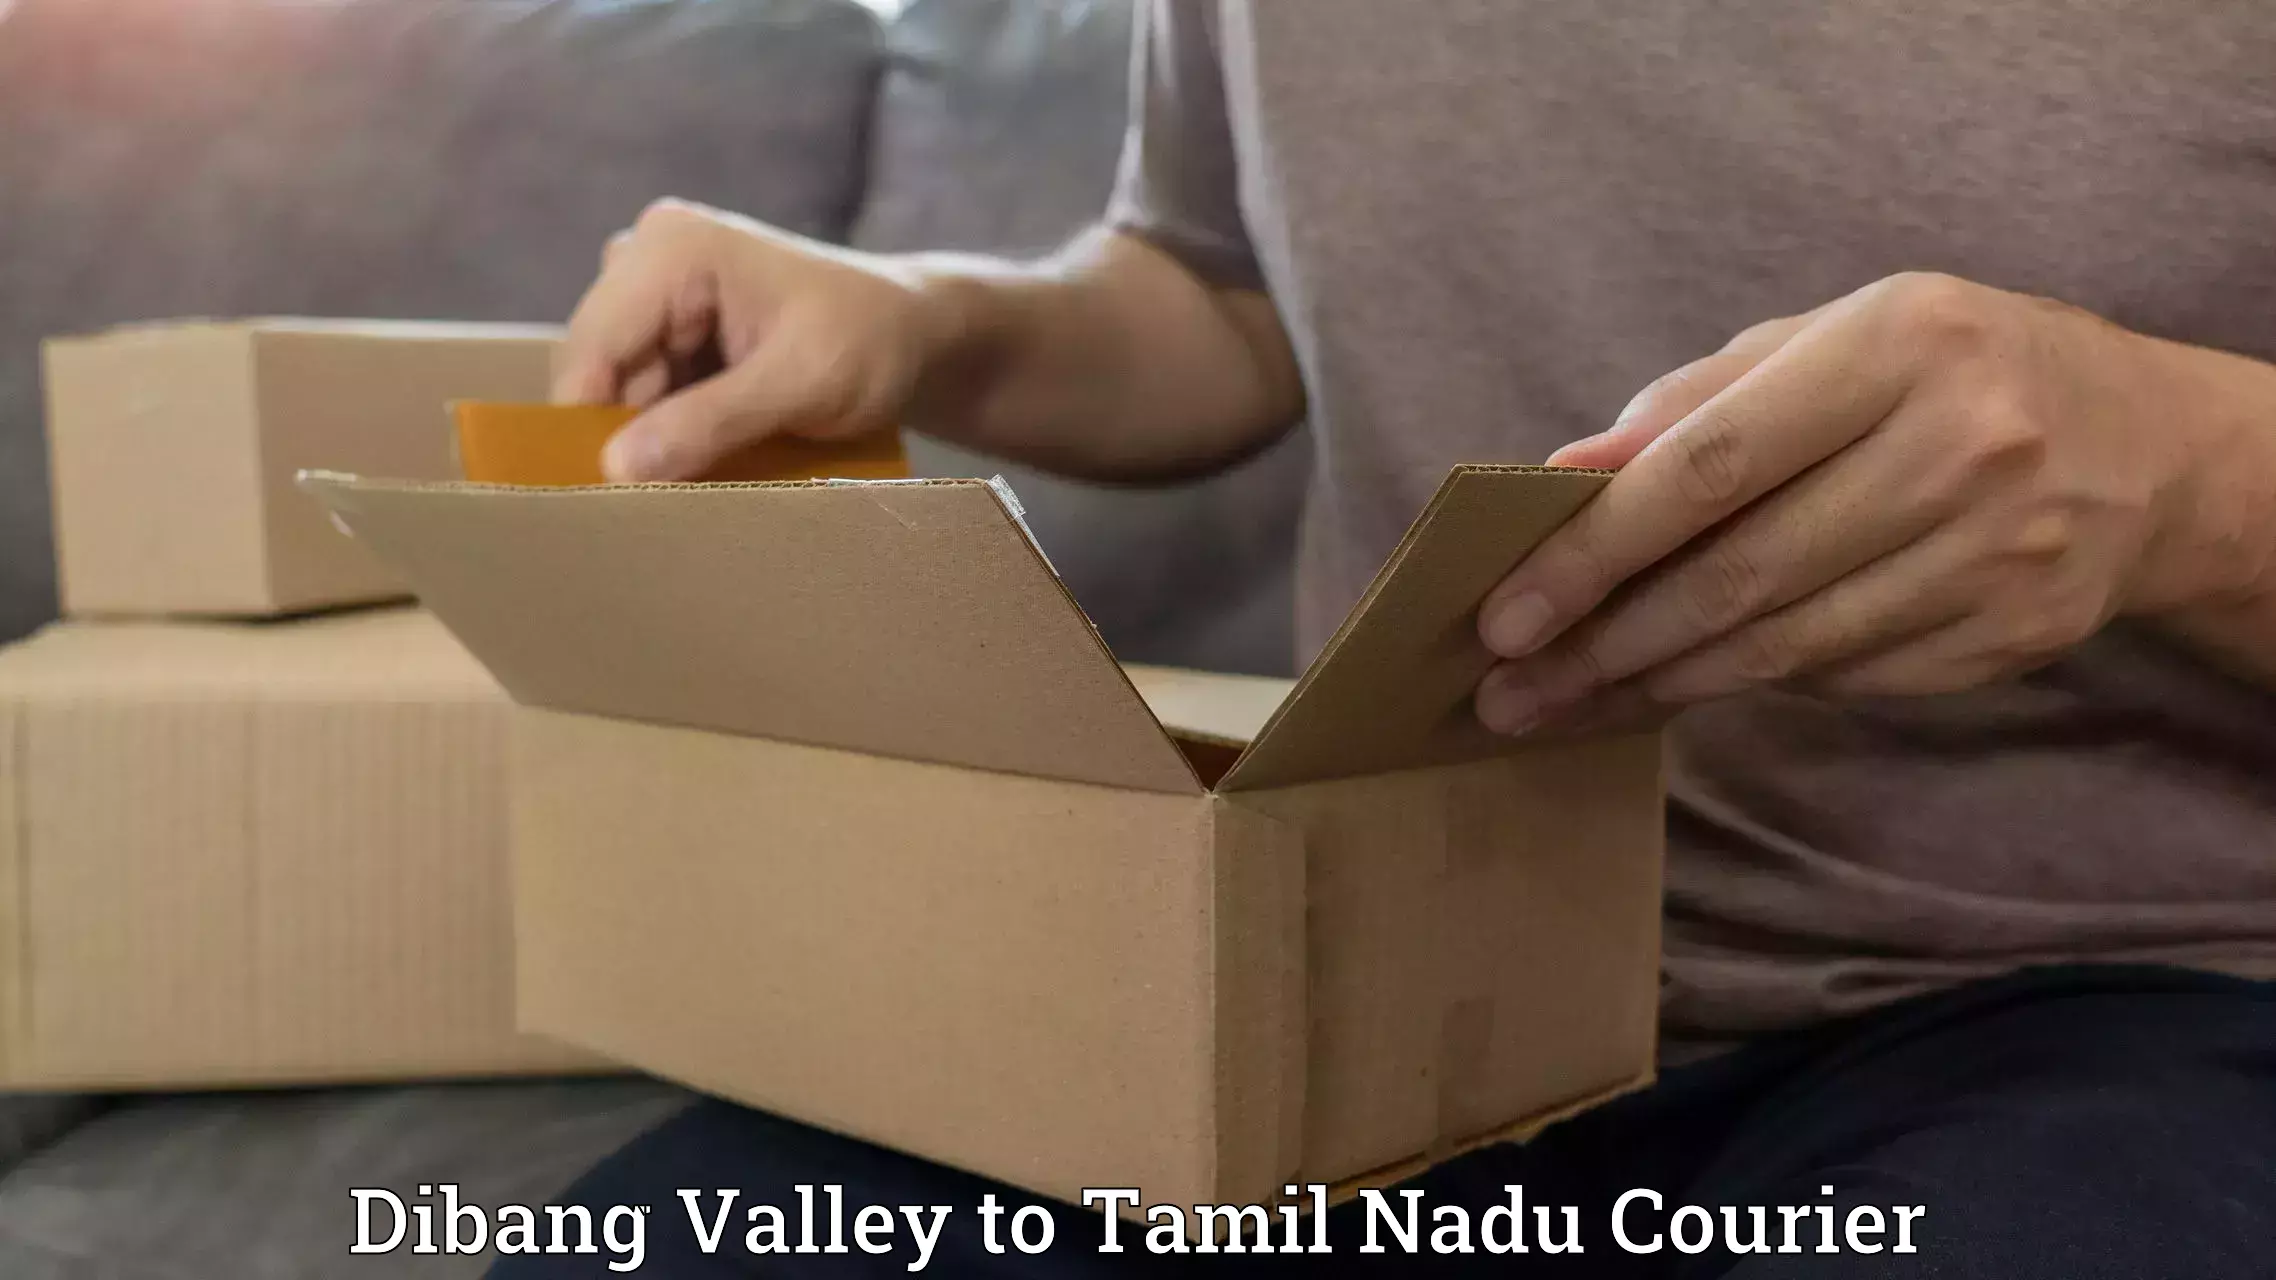 Courier service innovation Dibang Valley to Tuticorin